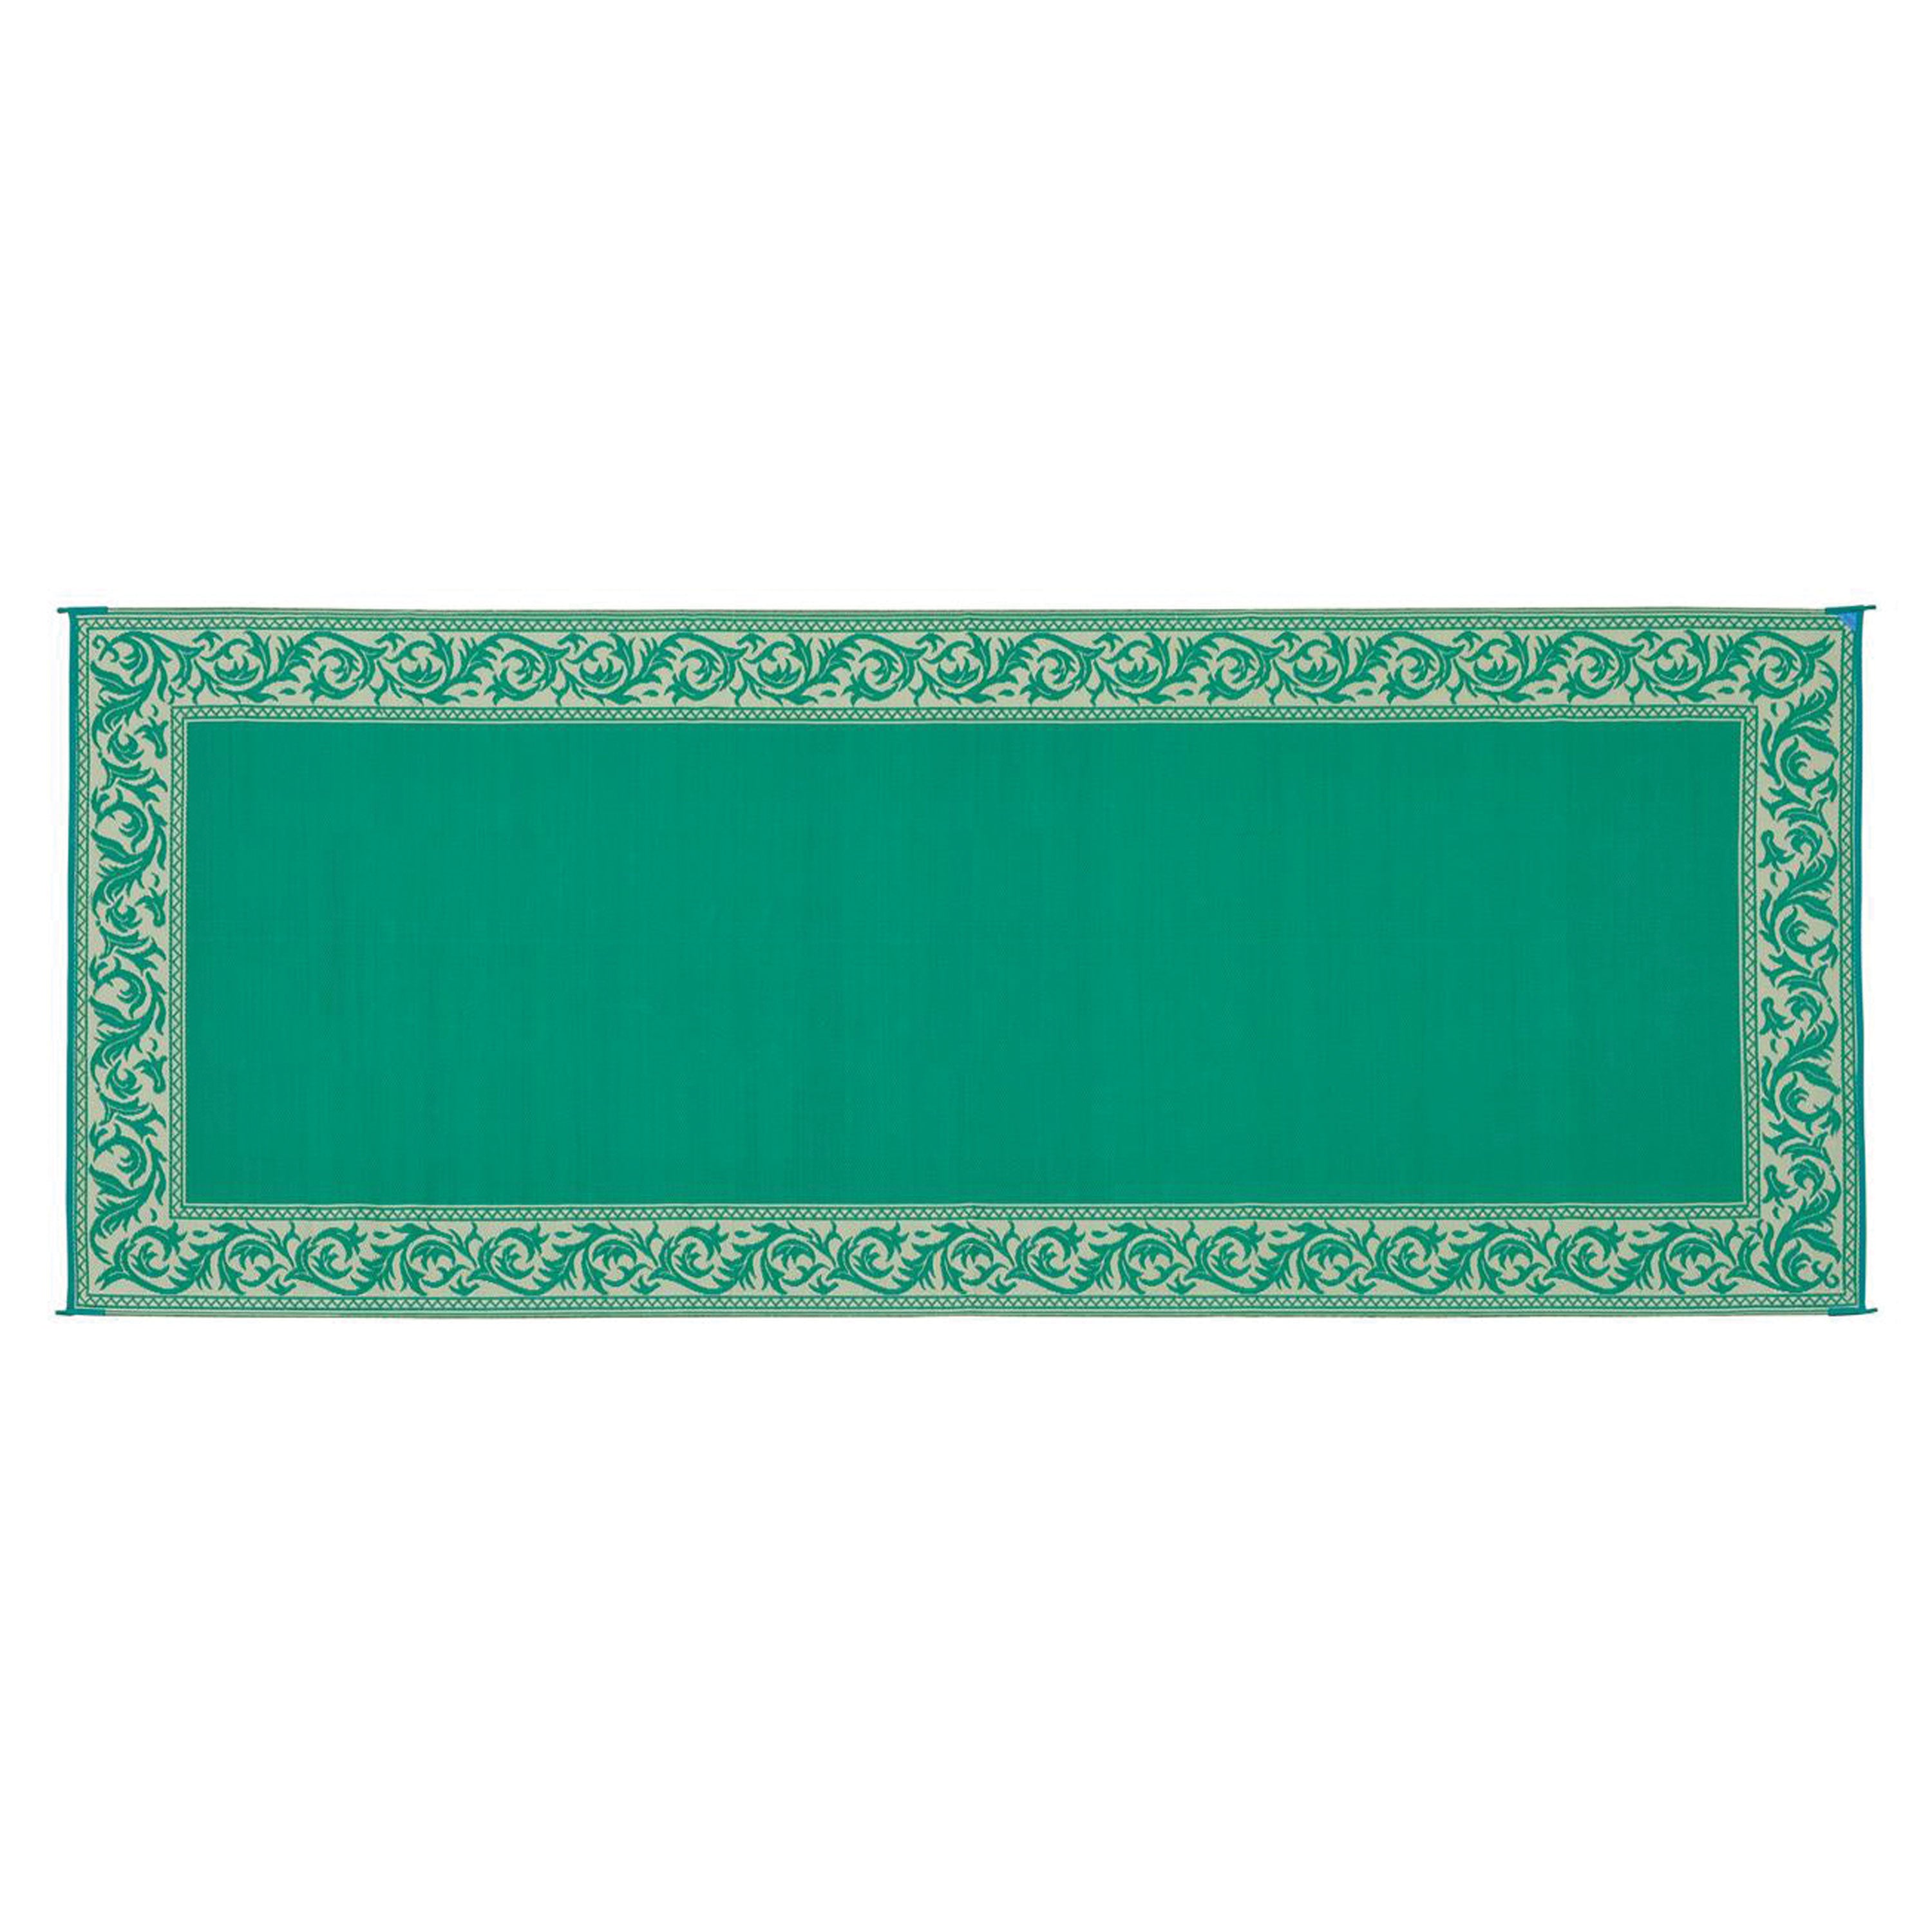 Ming's Mark RC4 Stylish Camping Reversible Classical Patio Mat - 8' x 20', Green/Beige